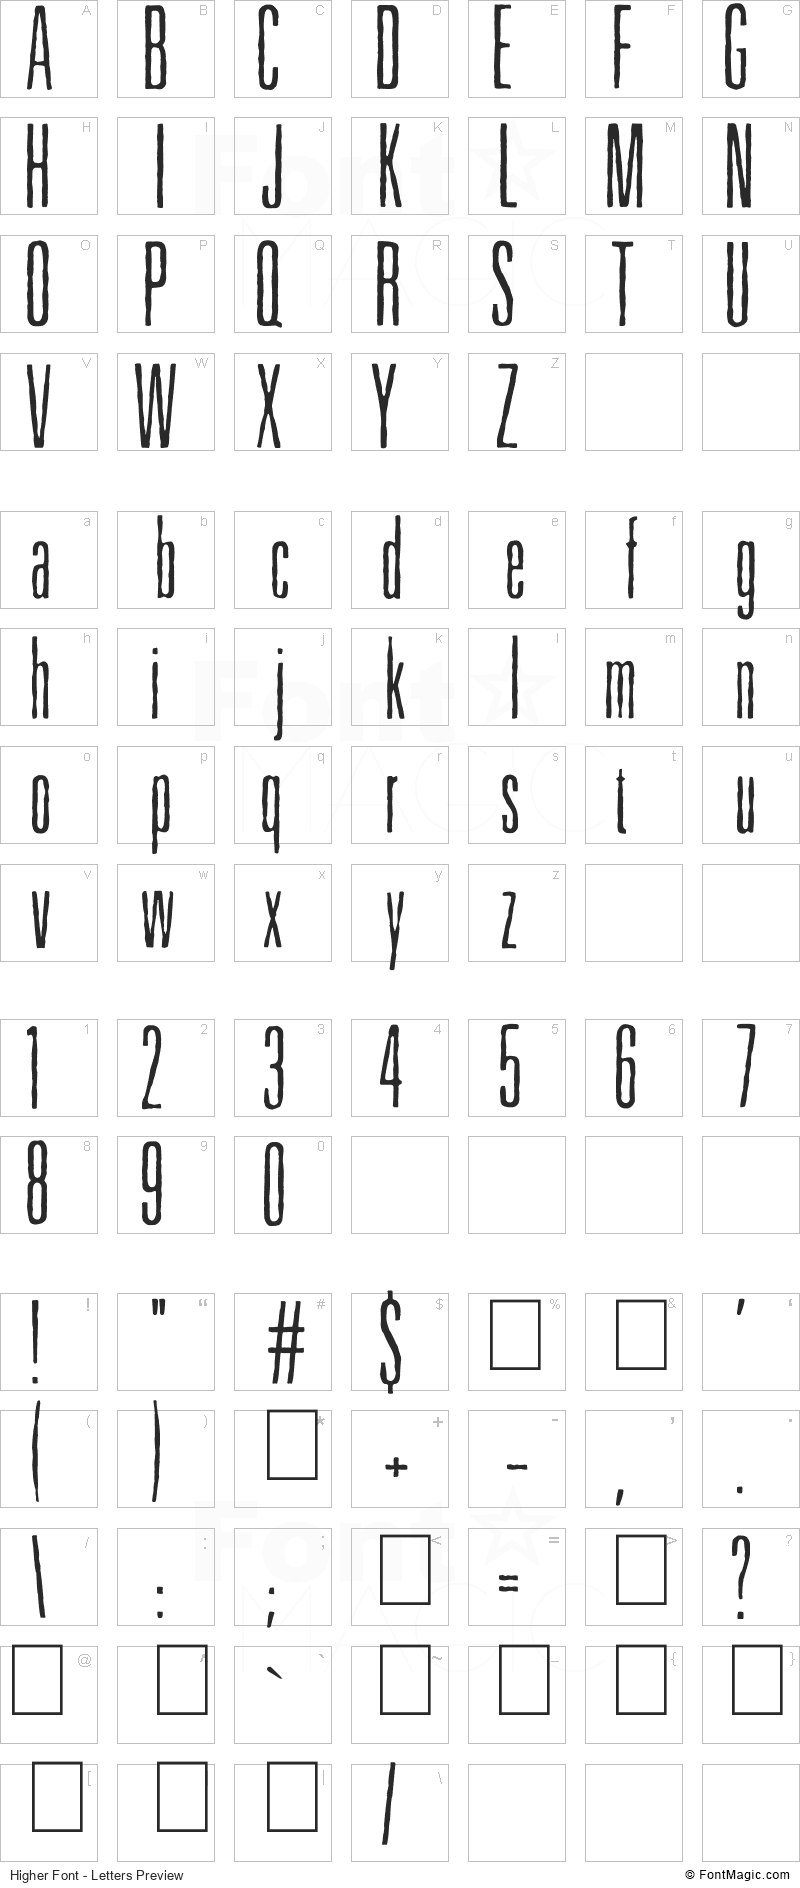 Higher Font - All Latters Preview Chart